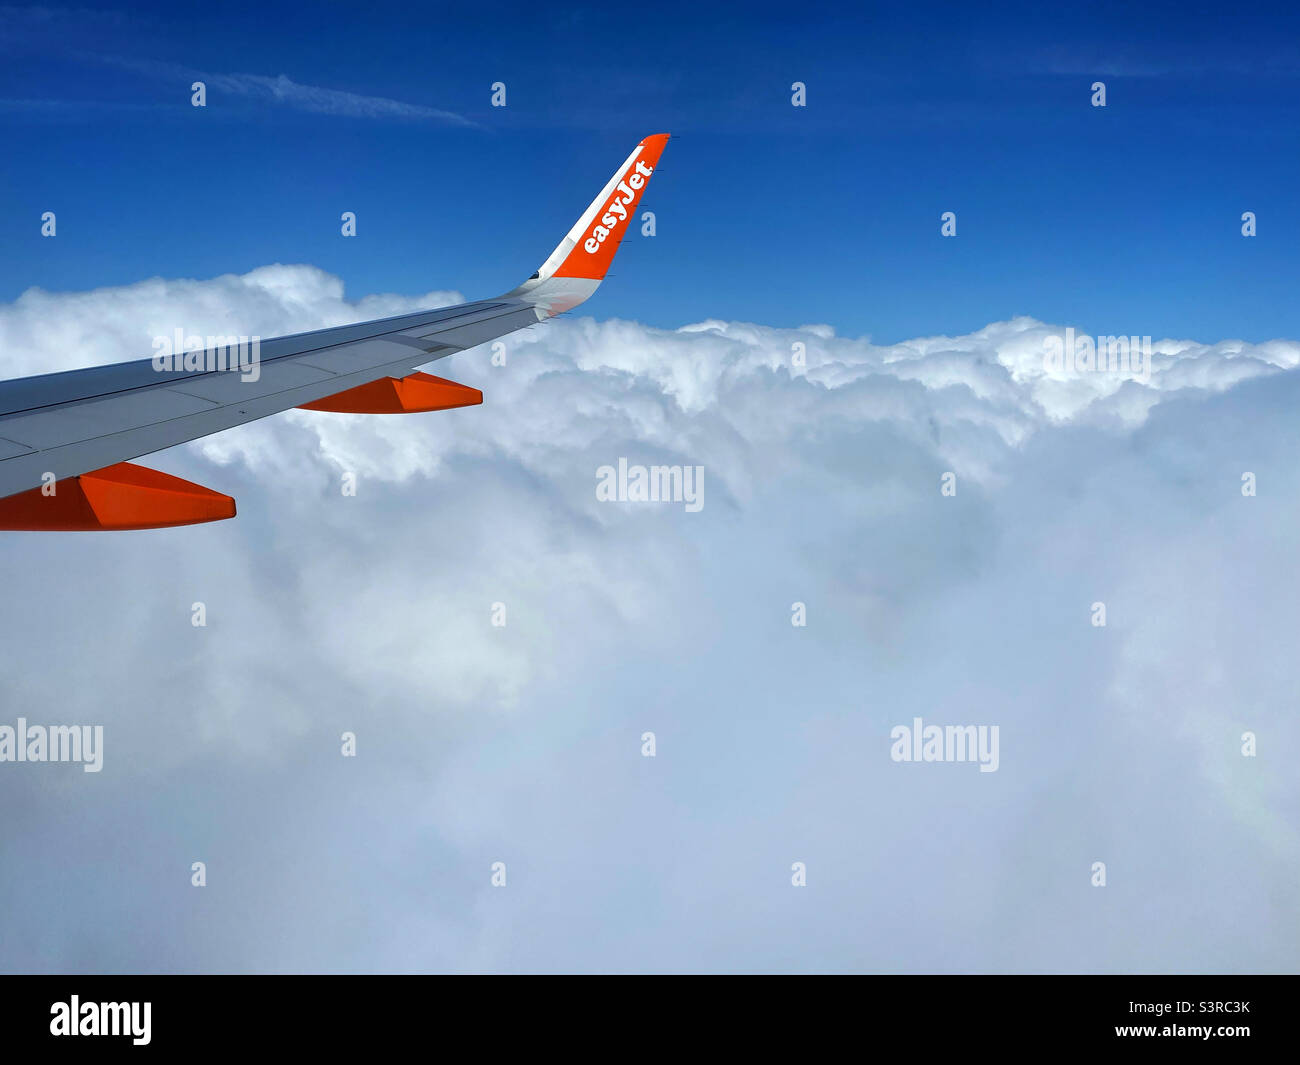 The wing of an easyJet A320 aircraft above the clouds, taking people to an exciting holiday destination. EasyJet is one of Europe’s largest budget airlines. Photo ©️ COLIN HOSKINS. Stock Photo